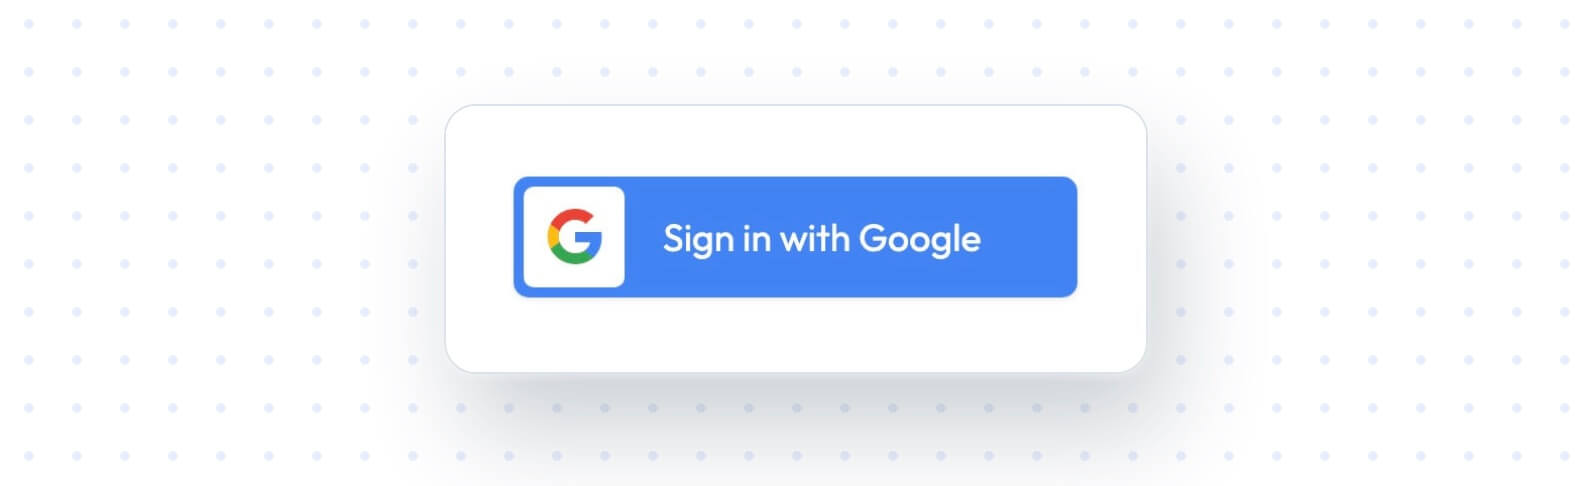 sign_in_with_google_button.jpg